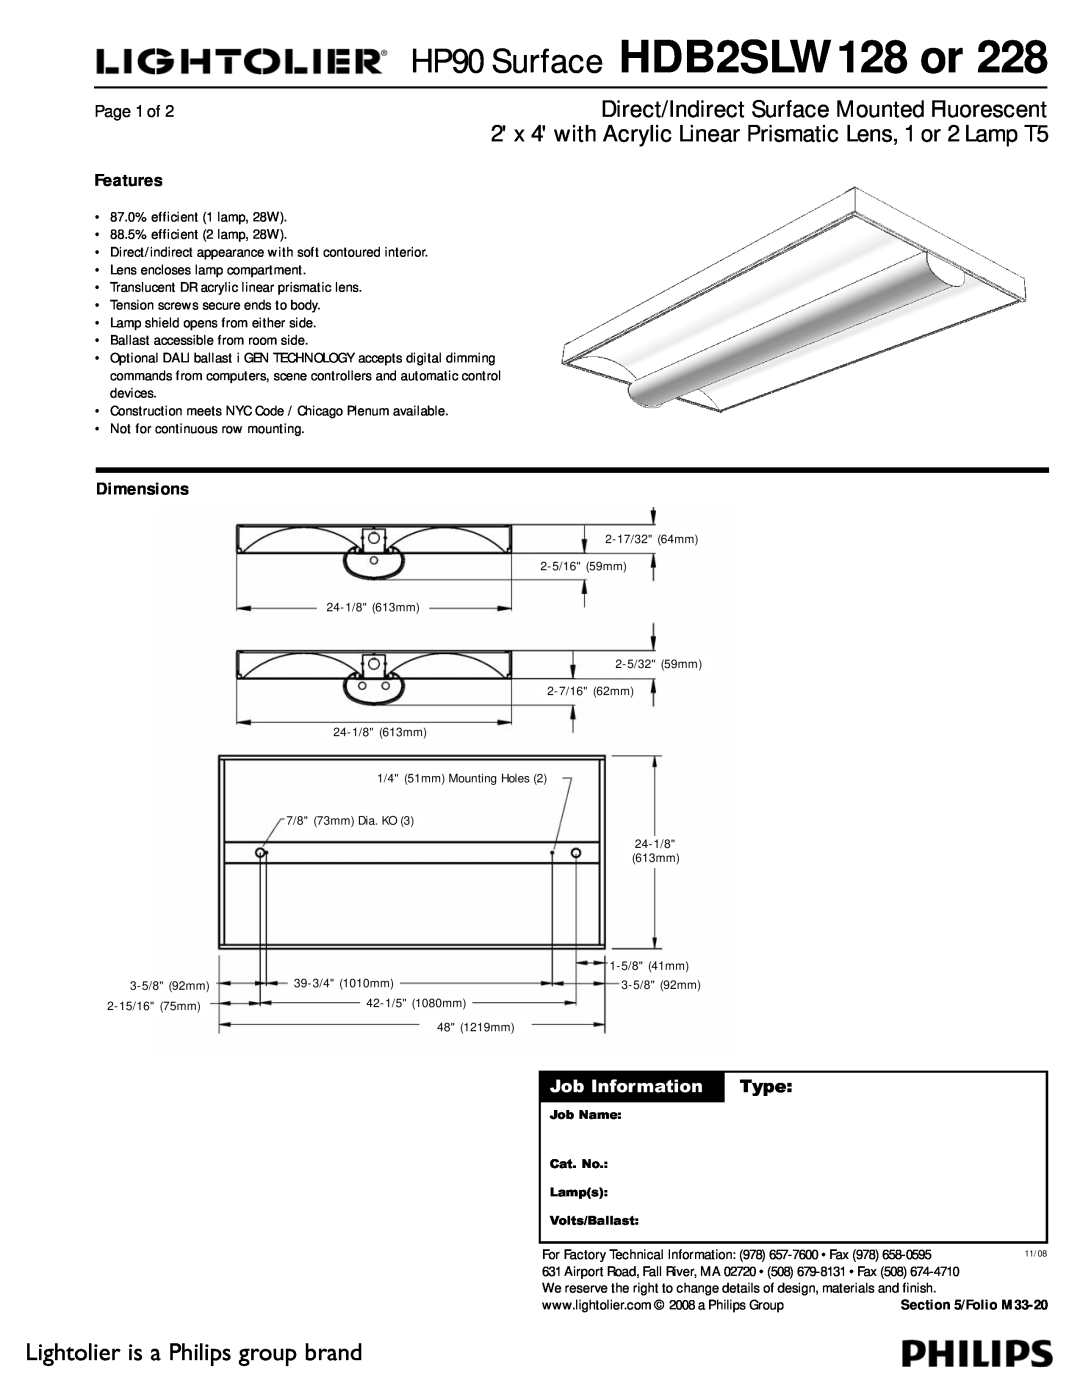 Lightolier HDB2SLW228 dimensions HP90 Surface HDB2SLW128 or, Lightolier is a Philips group brand, Features, Dimensions 